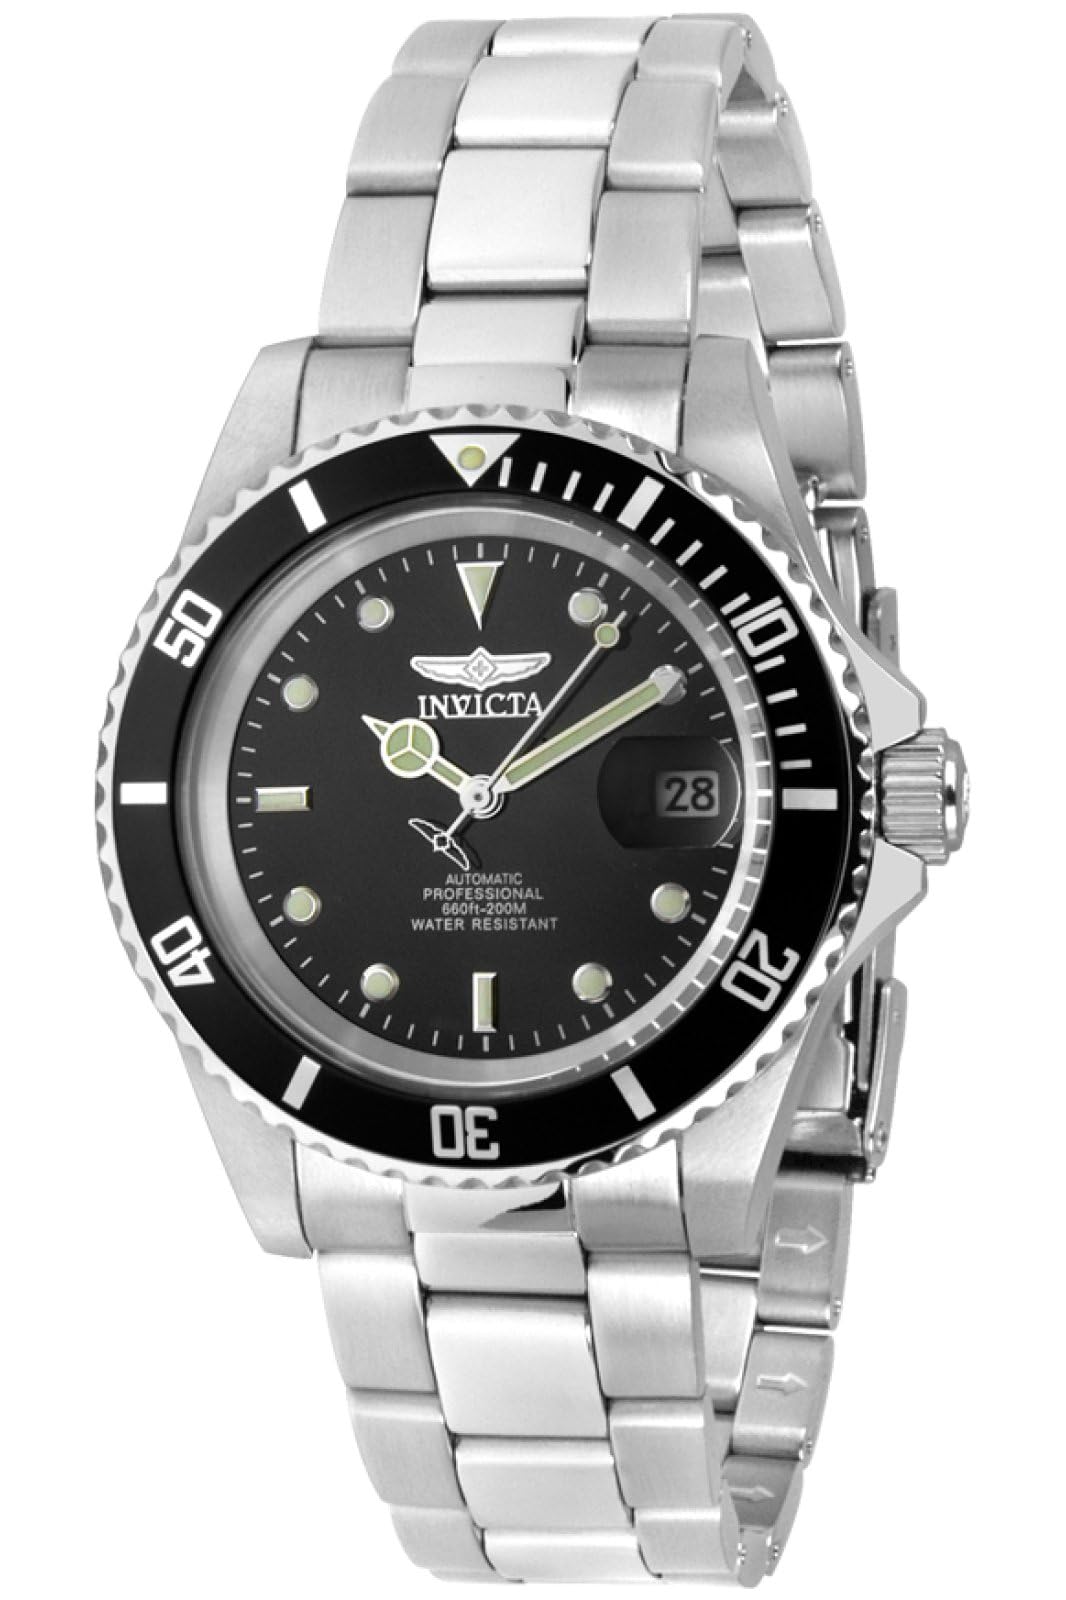 Invicta Men's 8926OB Pro Diver Collection Coin-Edge Automatic Watch $48.00 with free shipping